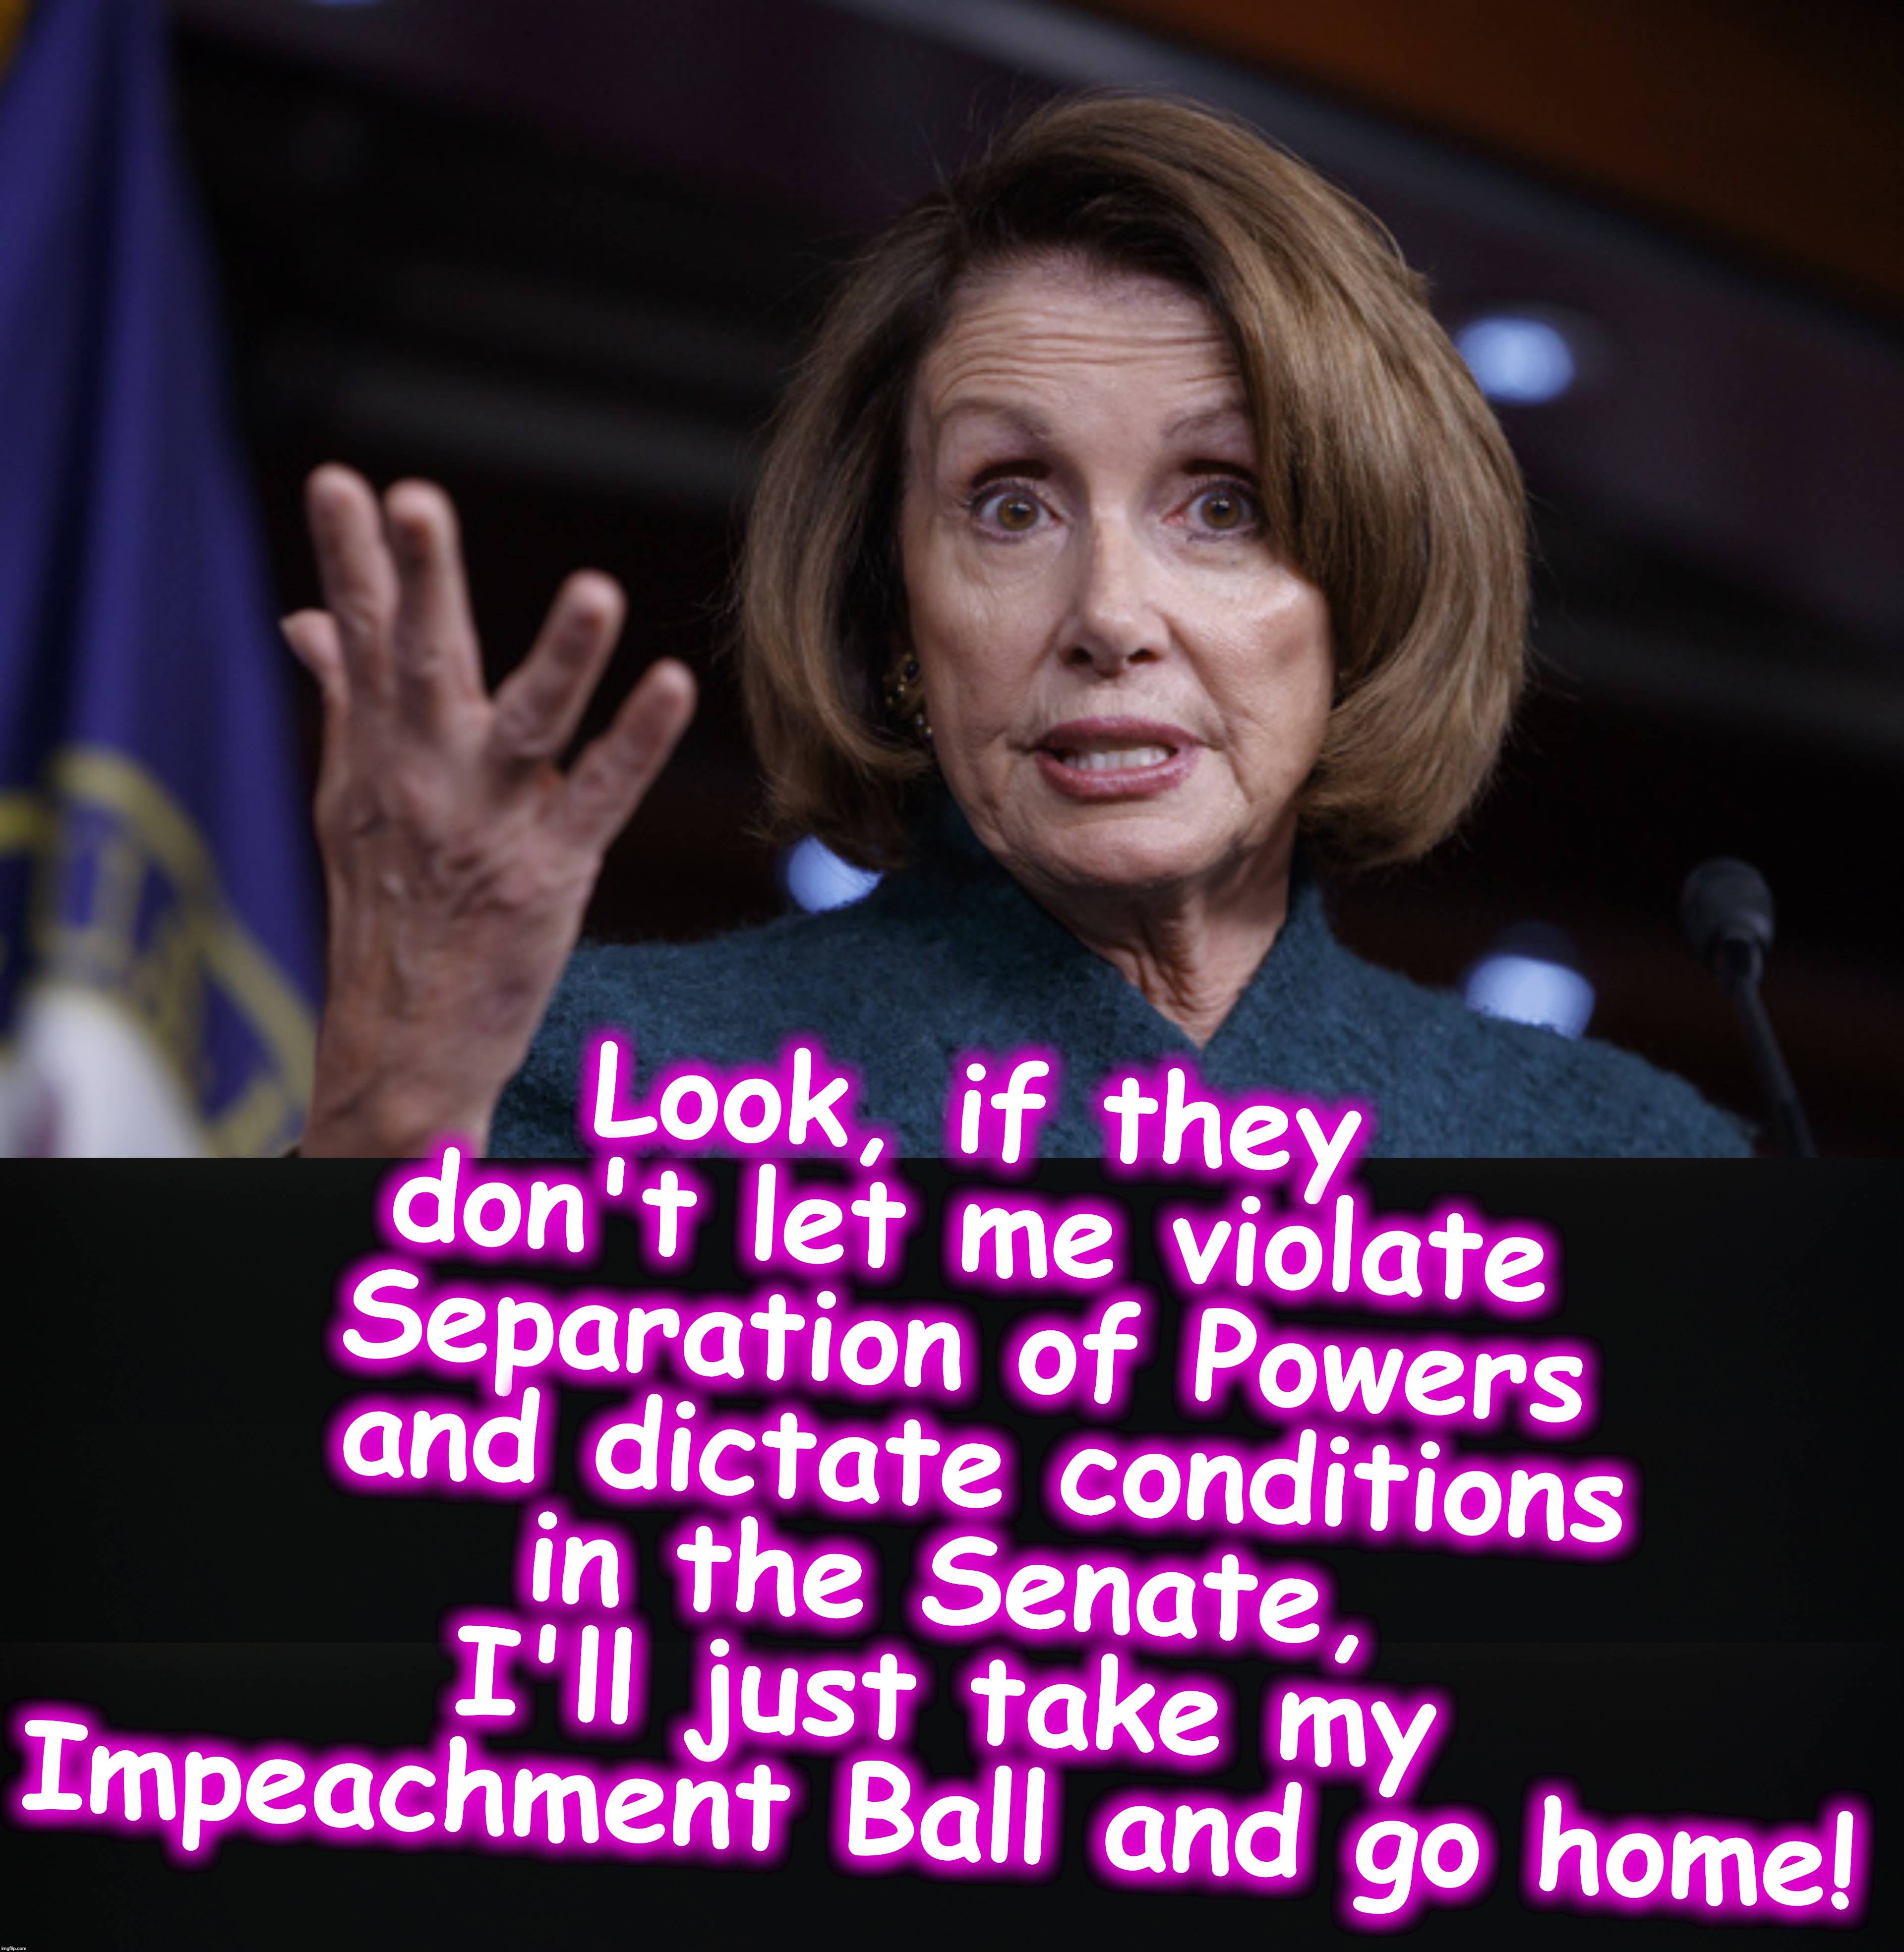 Tyrannical Nancy | Look, if they don't let me violate Separation of Powers
 and dictate conditions in the Senate, I'll just take my Impeachment Ball and go home! | image tagged in good old nancy pelosi | made w/ Imgflip meme maker